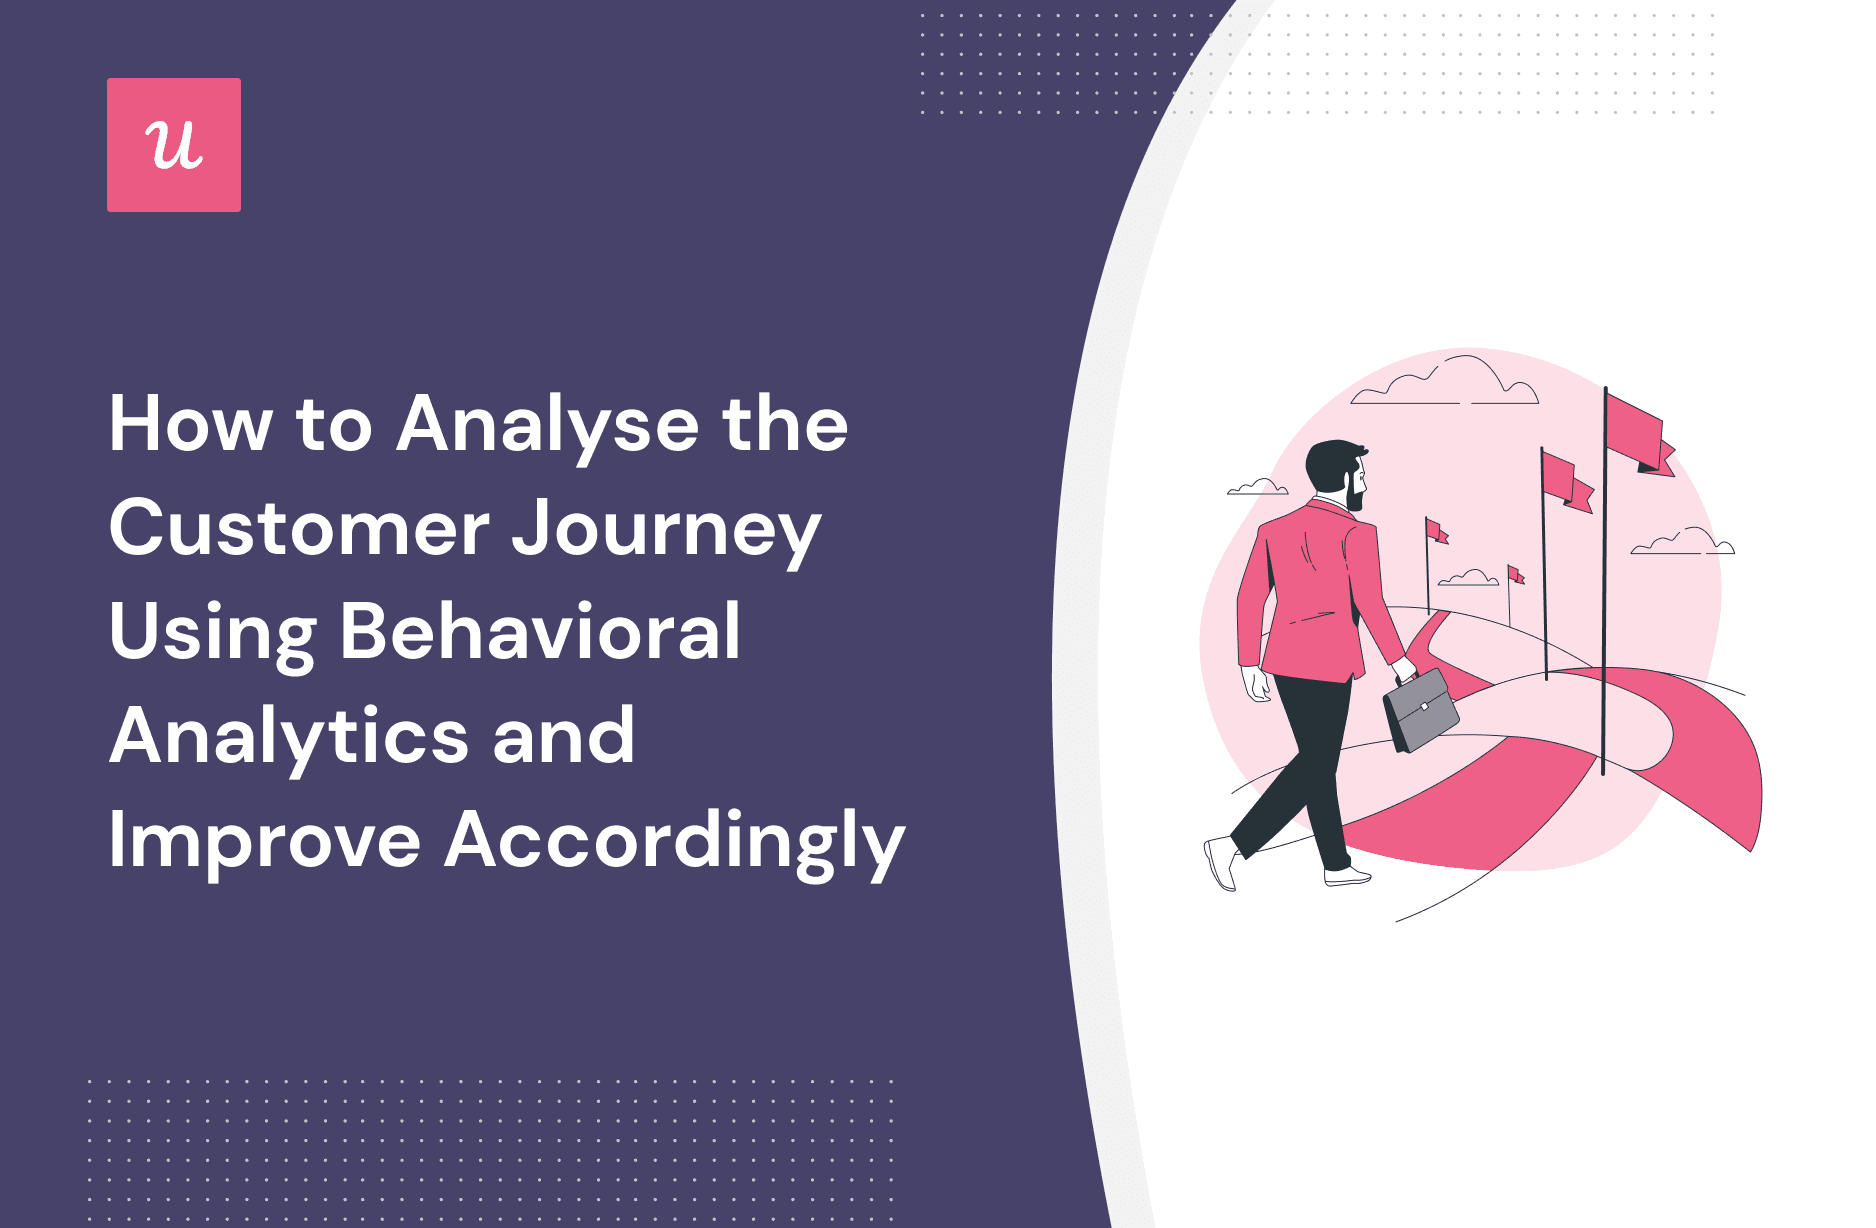 How-to-Analyse-the-Customer-Journey-Using-Behavioral-Analytics-and-Improve-Accordingly